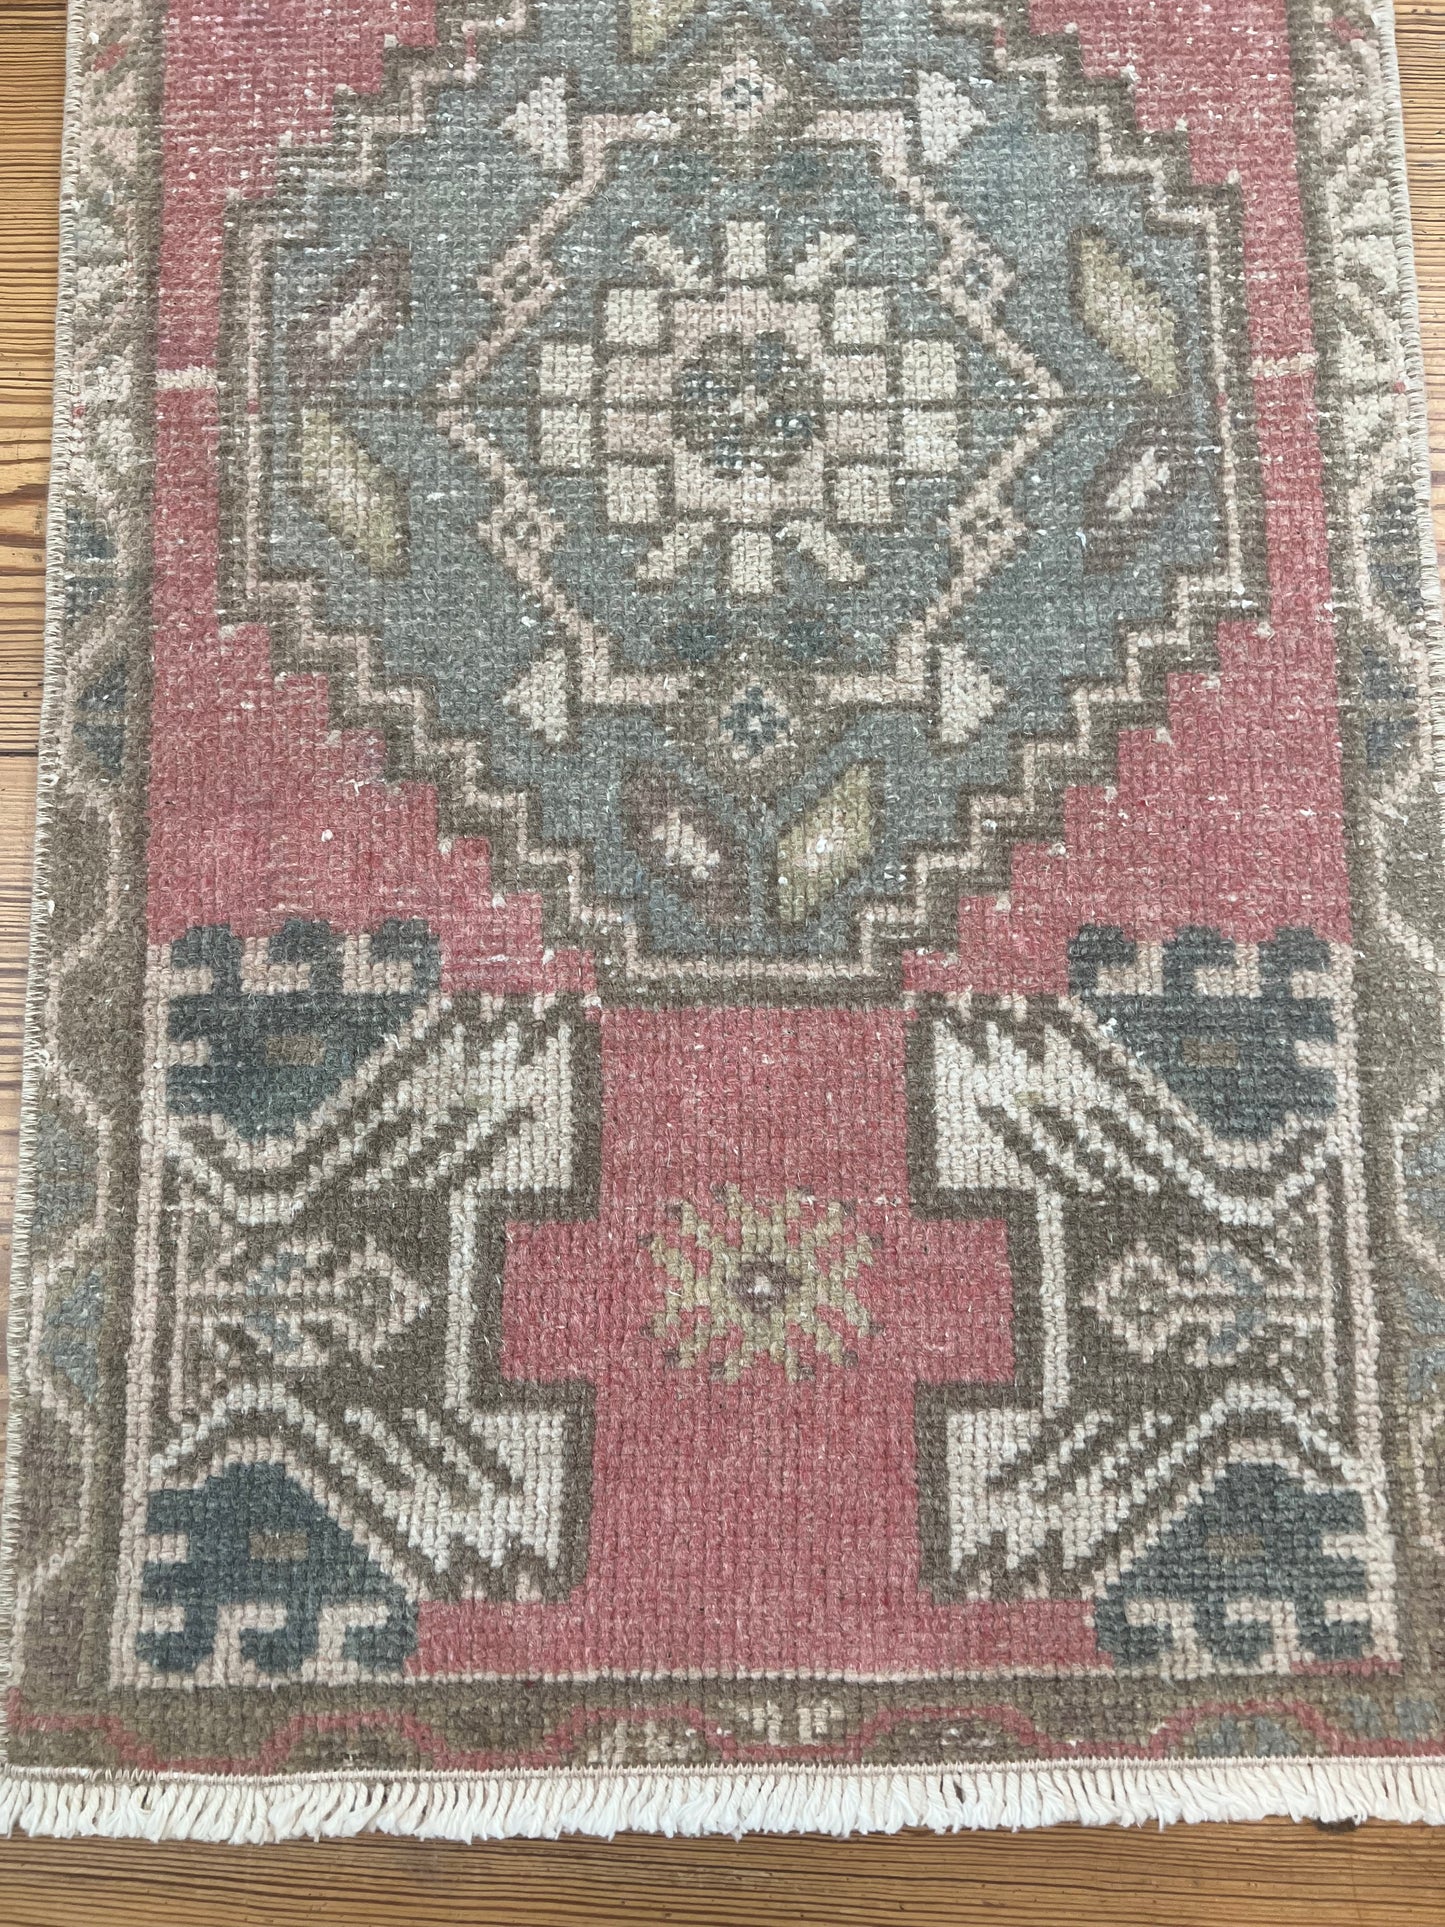 1'7" x 3'1" Small Rug